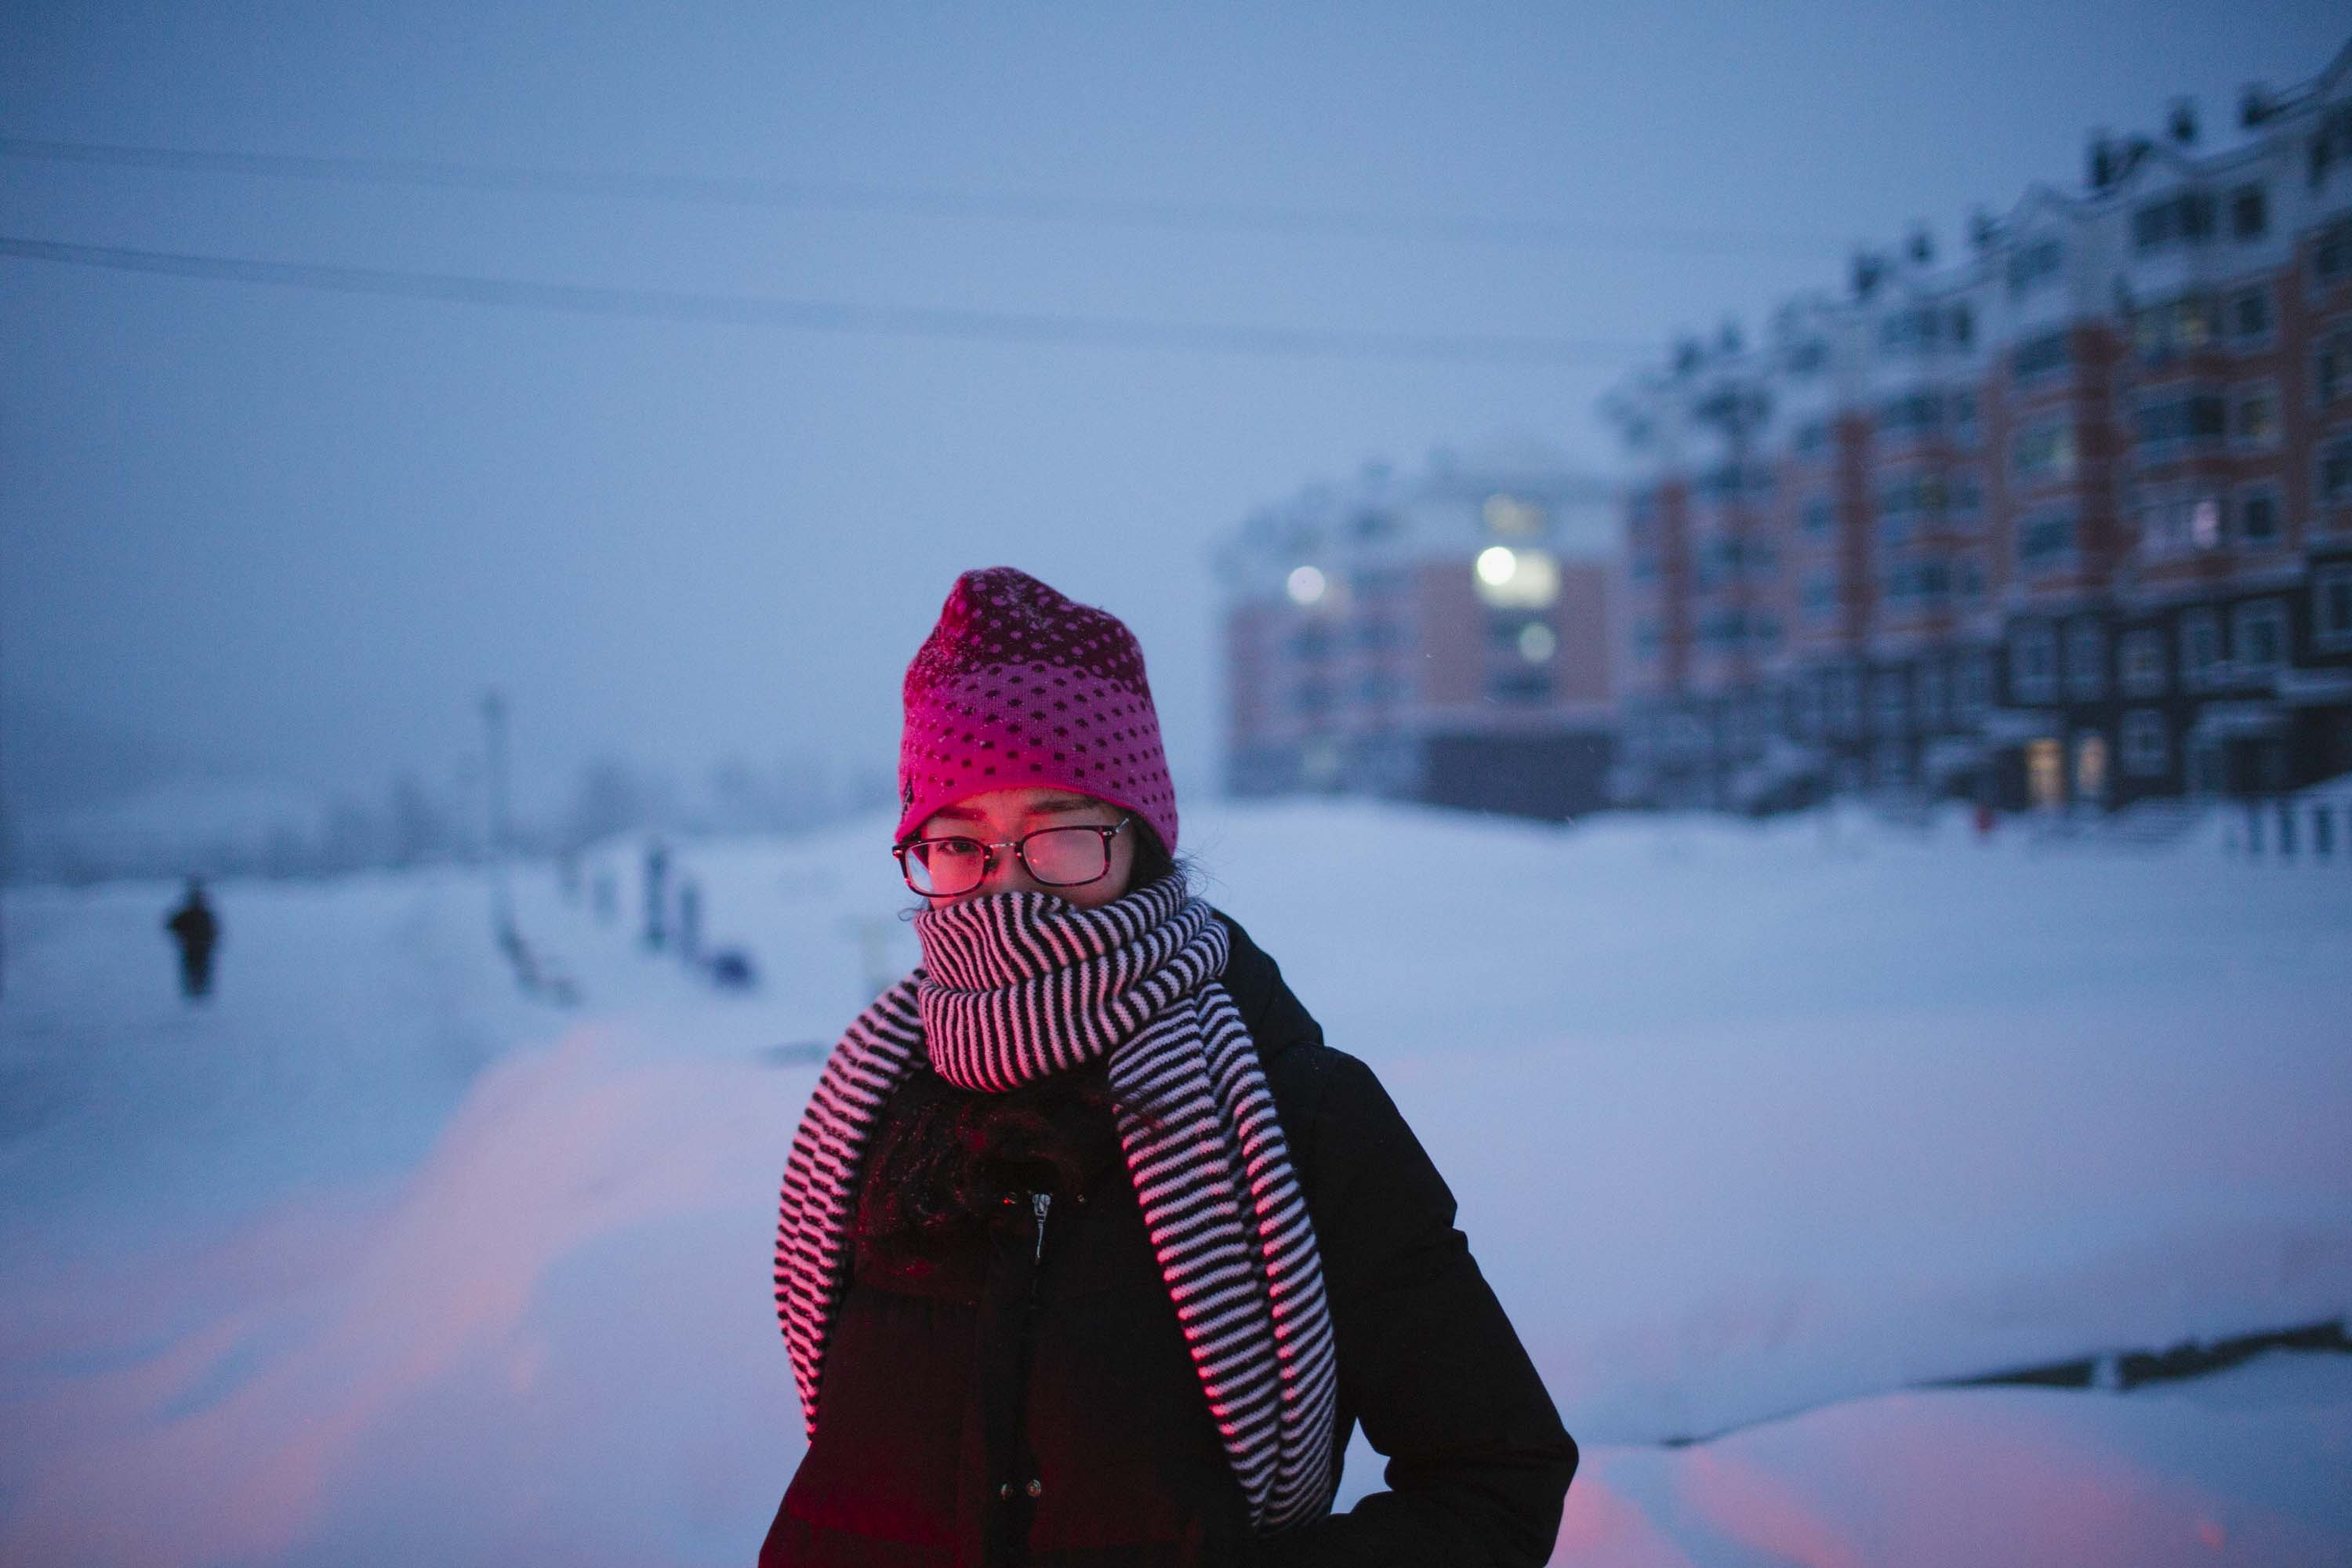 Ru Dongying walks down a snow-covered street in Shuangyashan, in front of recently built apartments, Jan. 19, 2016. Her family’s home once stood here. Zhou Pinglang/Sixth Tone